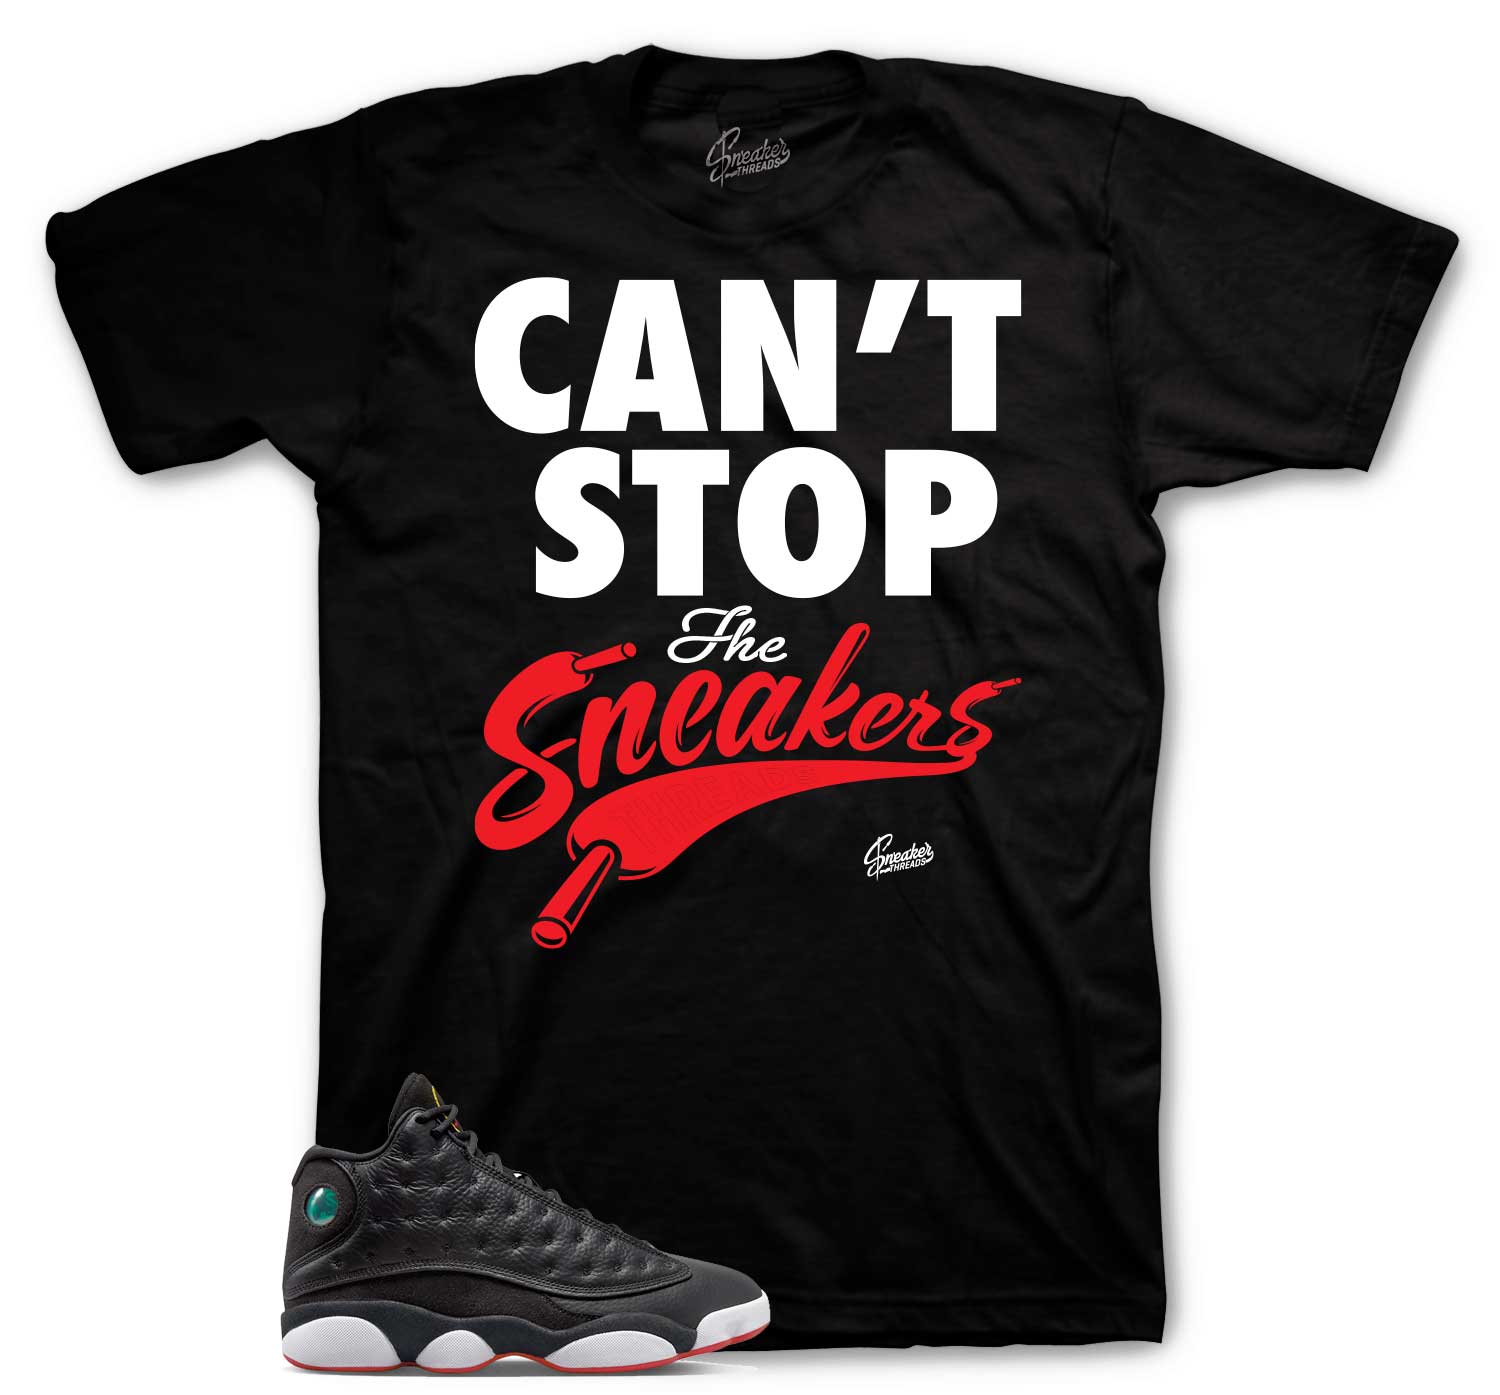 Retro 13 Playoff Shirt -  Can't Stop - Black